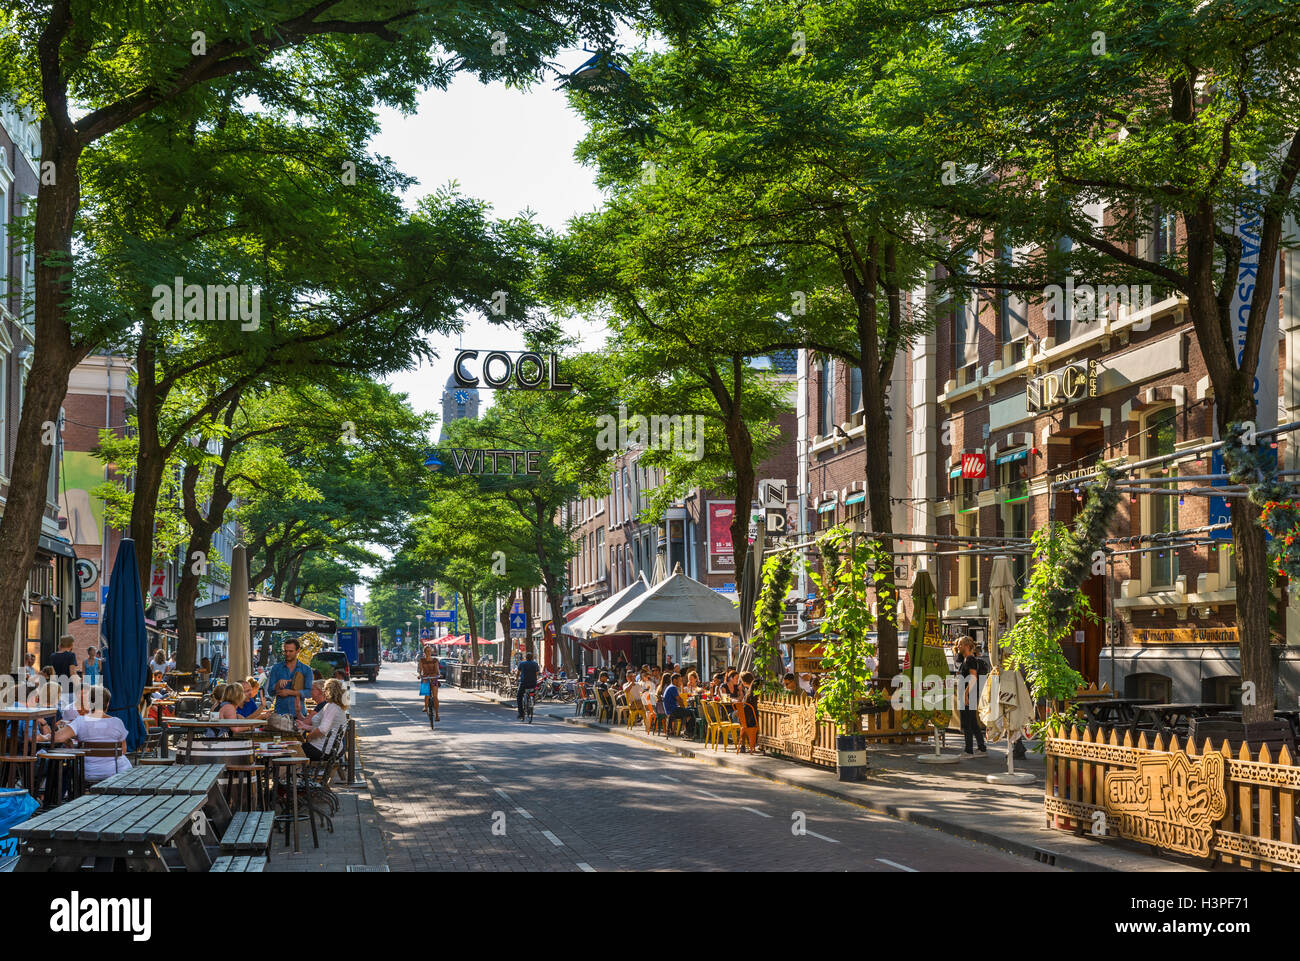 Rotterdam. Cafes bars and restaurants on Witte de Withstraat in the city centre, Rotterdam, Netherlands Stock Photo